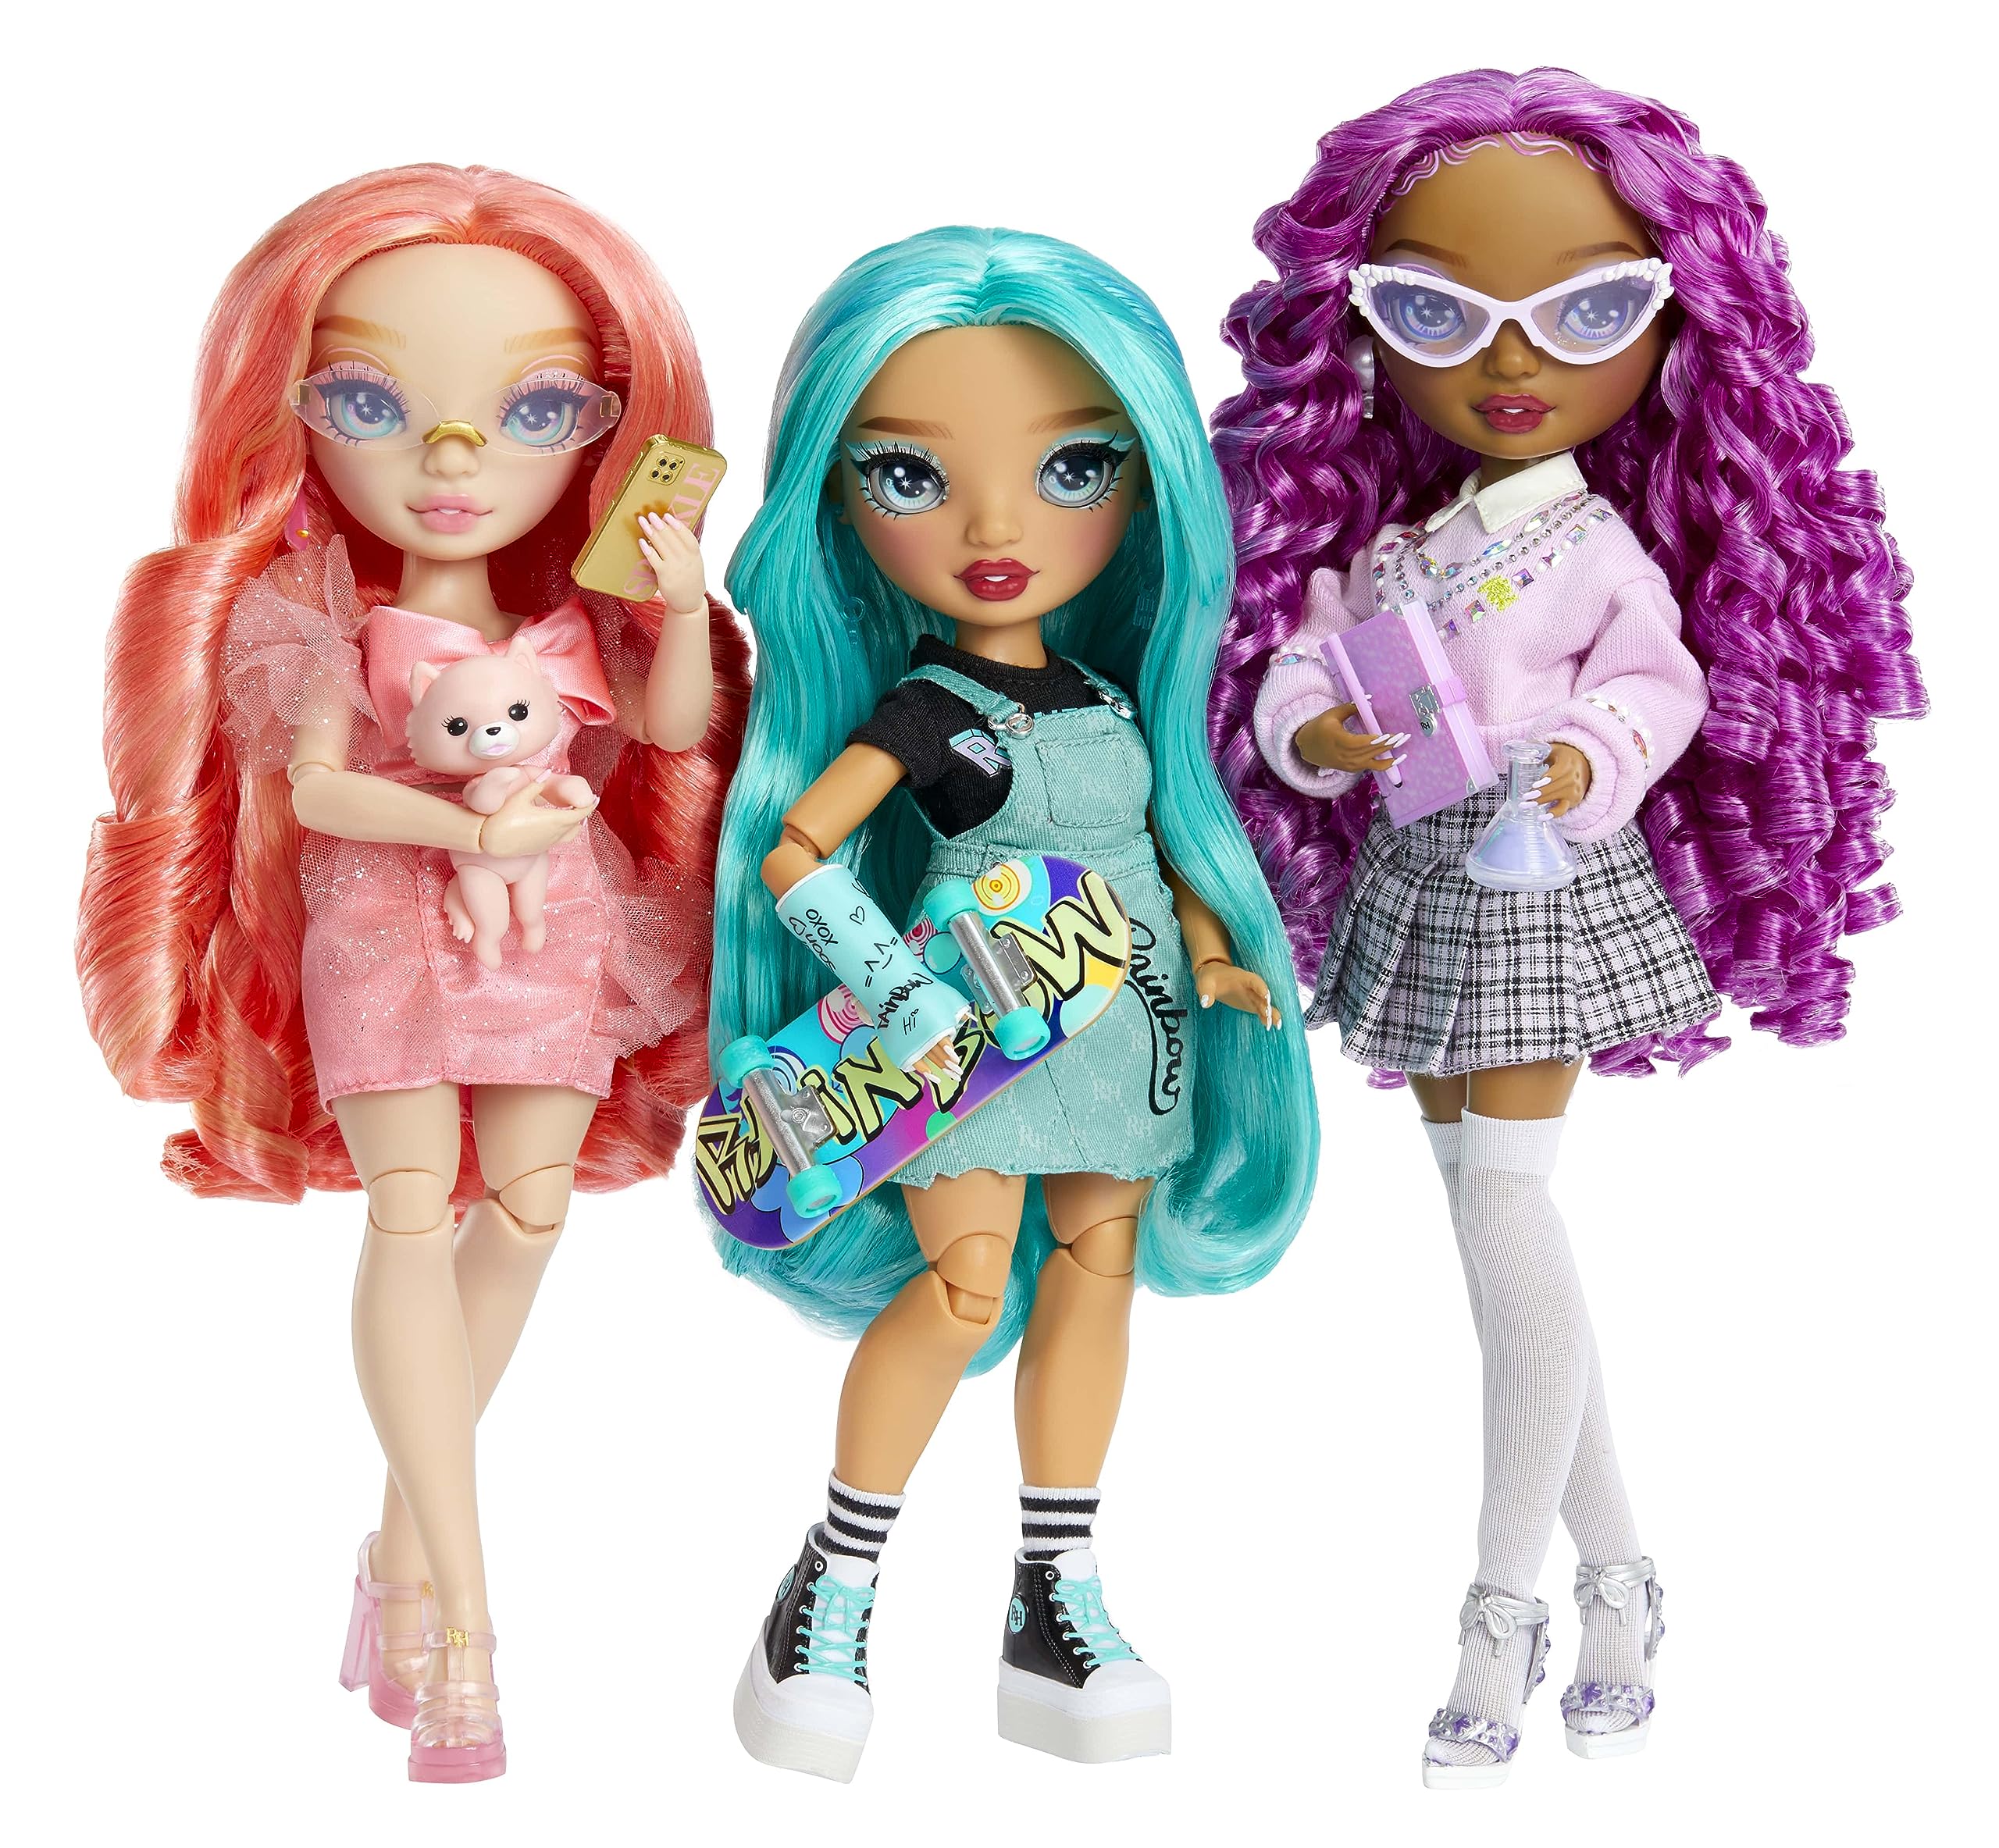 Rainbow High Lilac - Purple Fashion Doll in Fashionable Outfit, Glasses & 10+ Colorful Play Accessories. Gift for Kids 4-12 and Collectors.